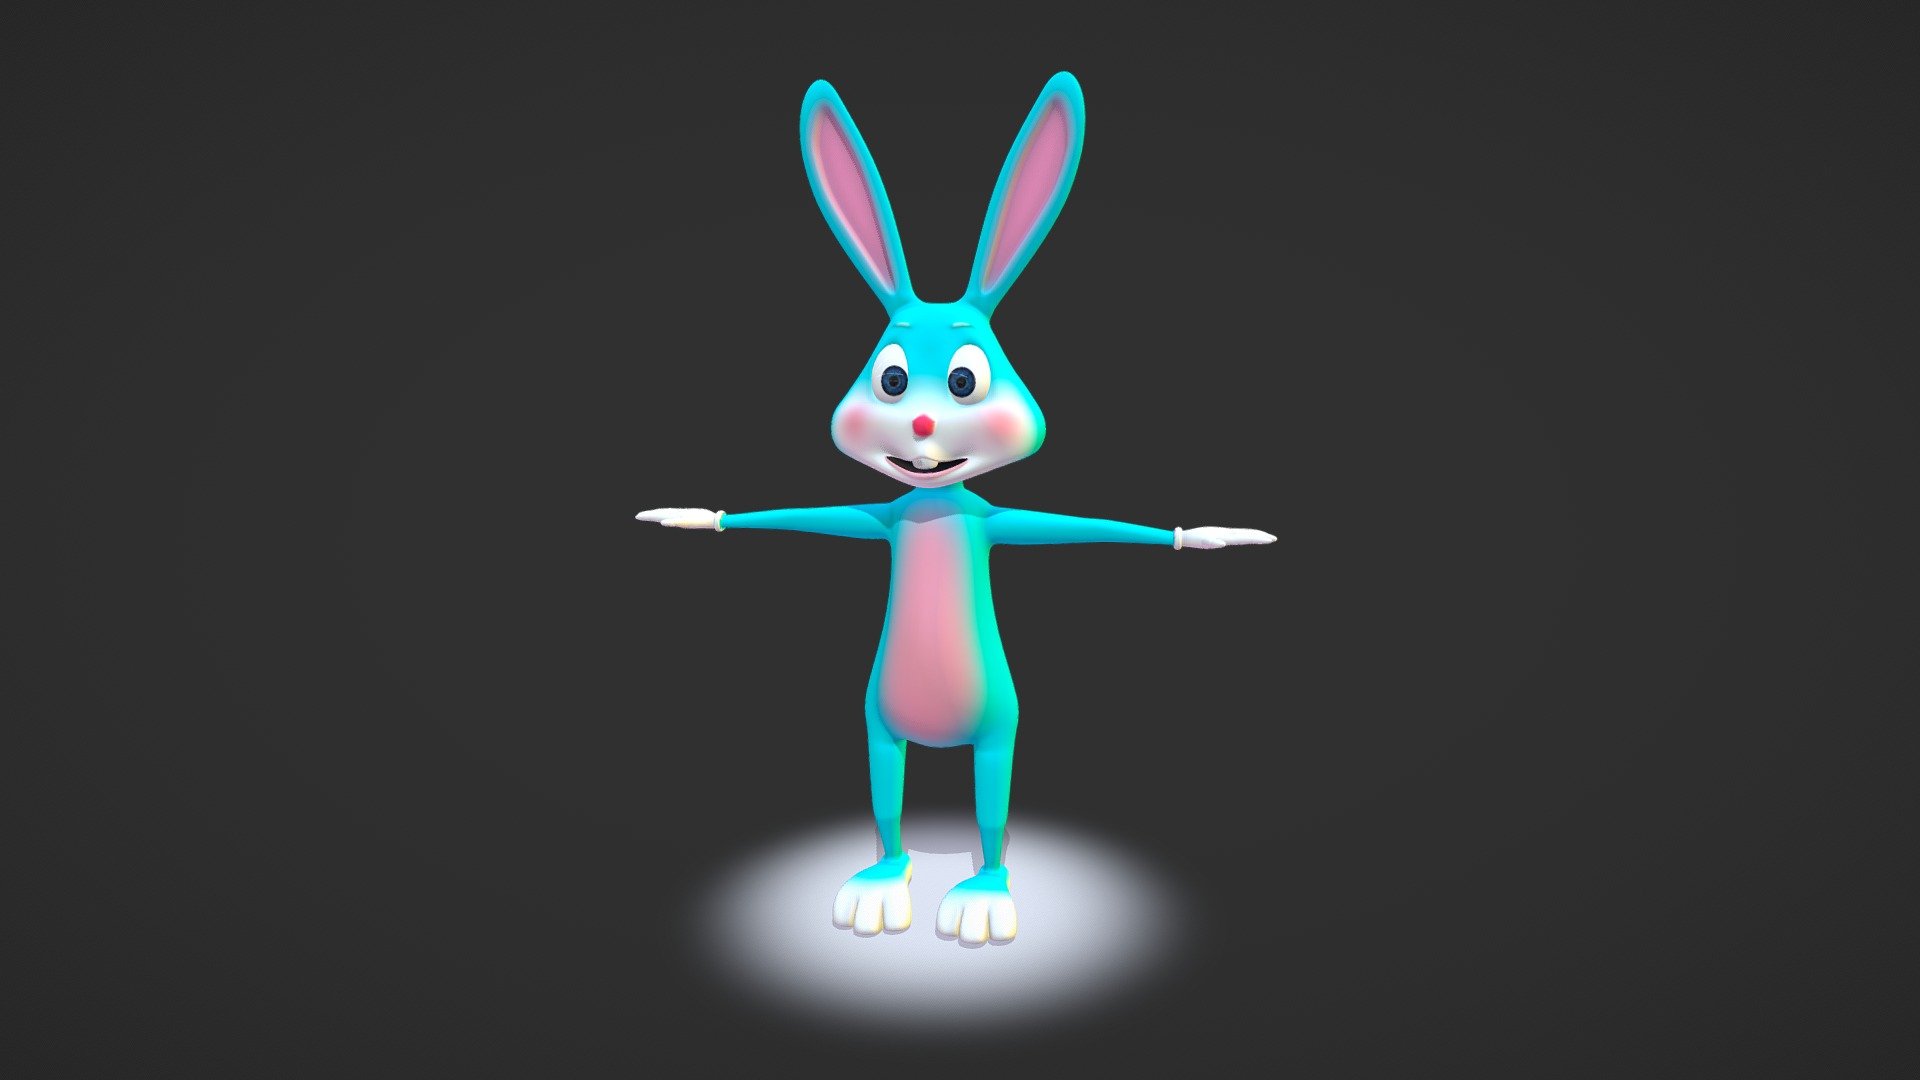 A cartoon bunny made with Cinema 4D.

This is a HighPoly version.

We also have a fully rigged lowpoly version as Cinema 4D file included.

This rig wasn't made for animation. We did it just for posing the character.

Watch the rig demo:
https://youtu.be/EFUTO2ulDho - Cartoon Bunny - Download Free 3D model by DANIEL WEINLEIN (@danielweinlein) 3d model